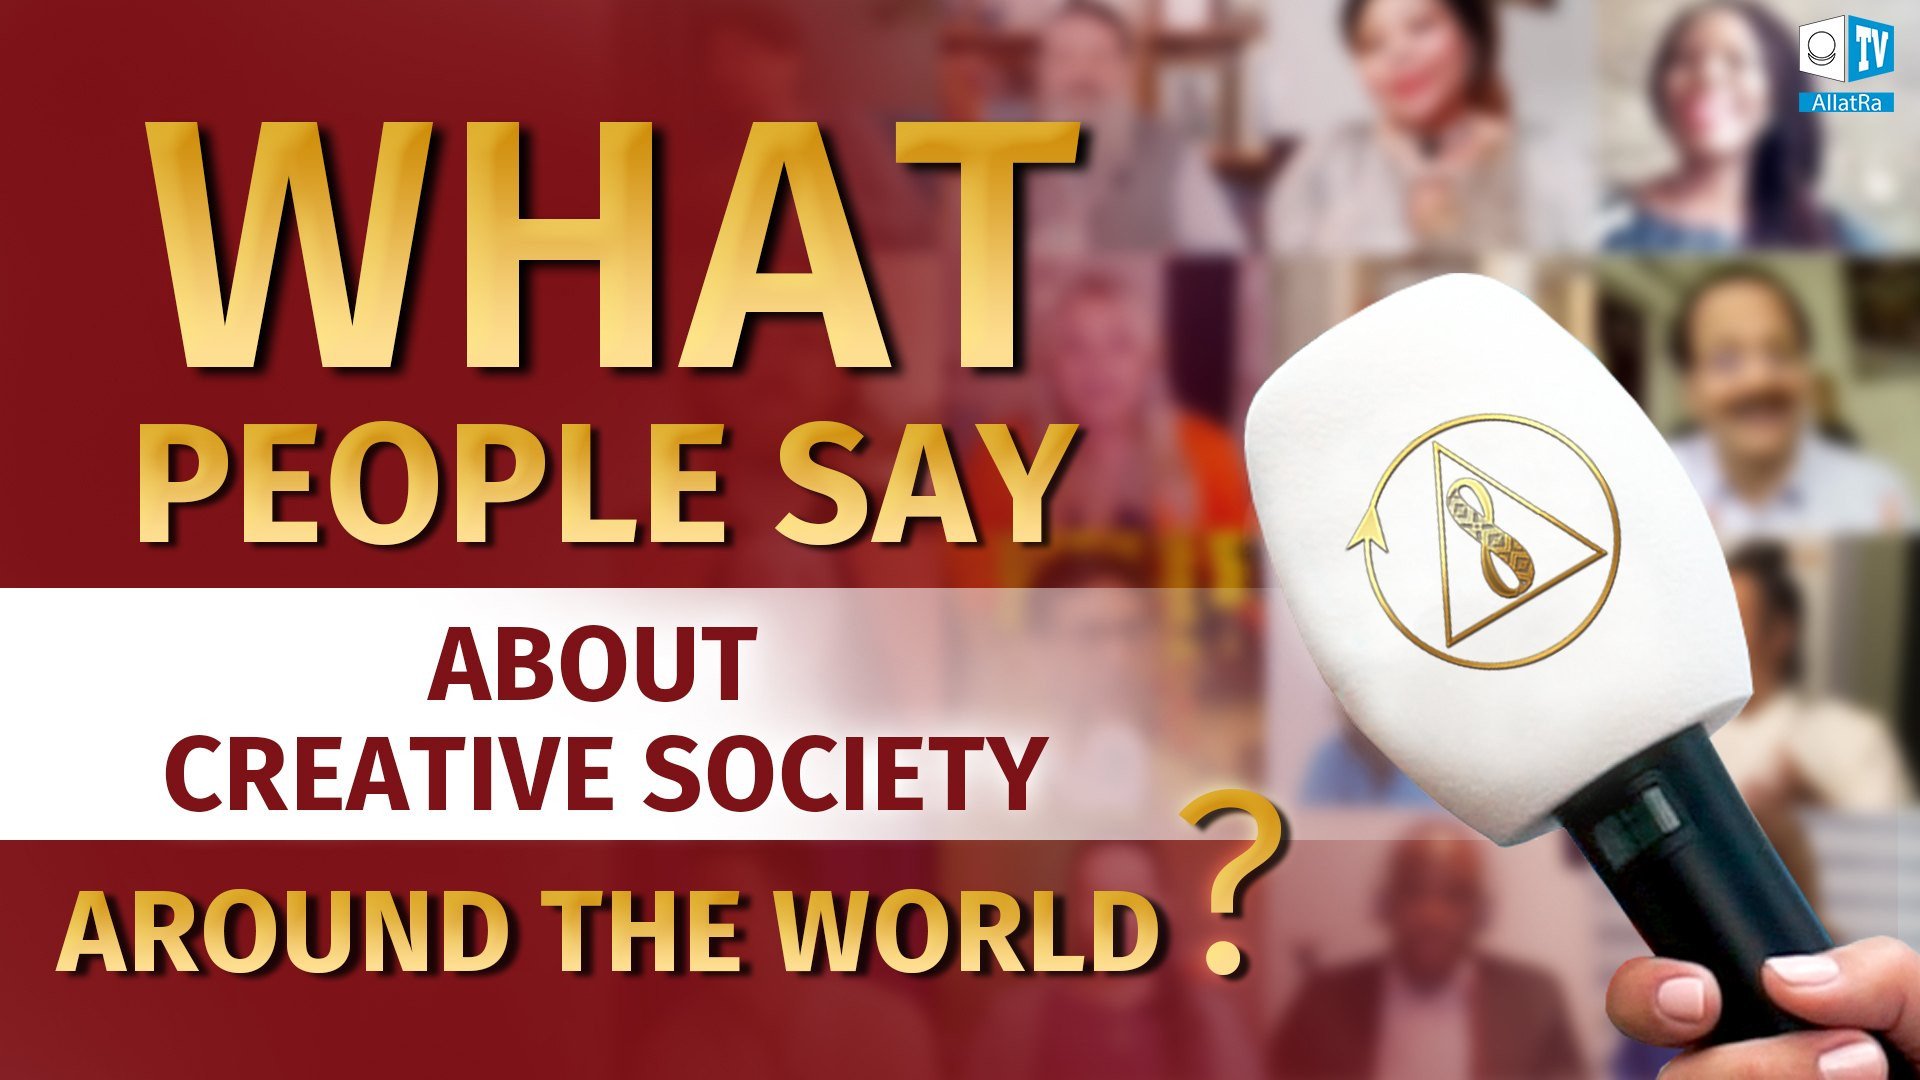 What do people around the world say about Creative Society?